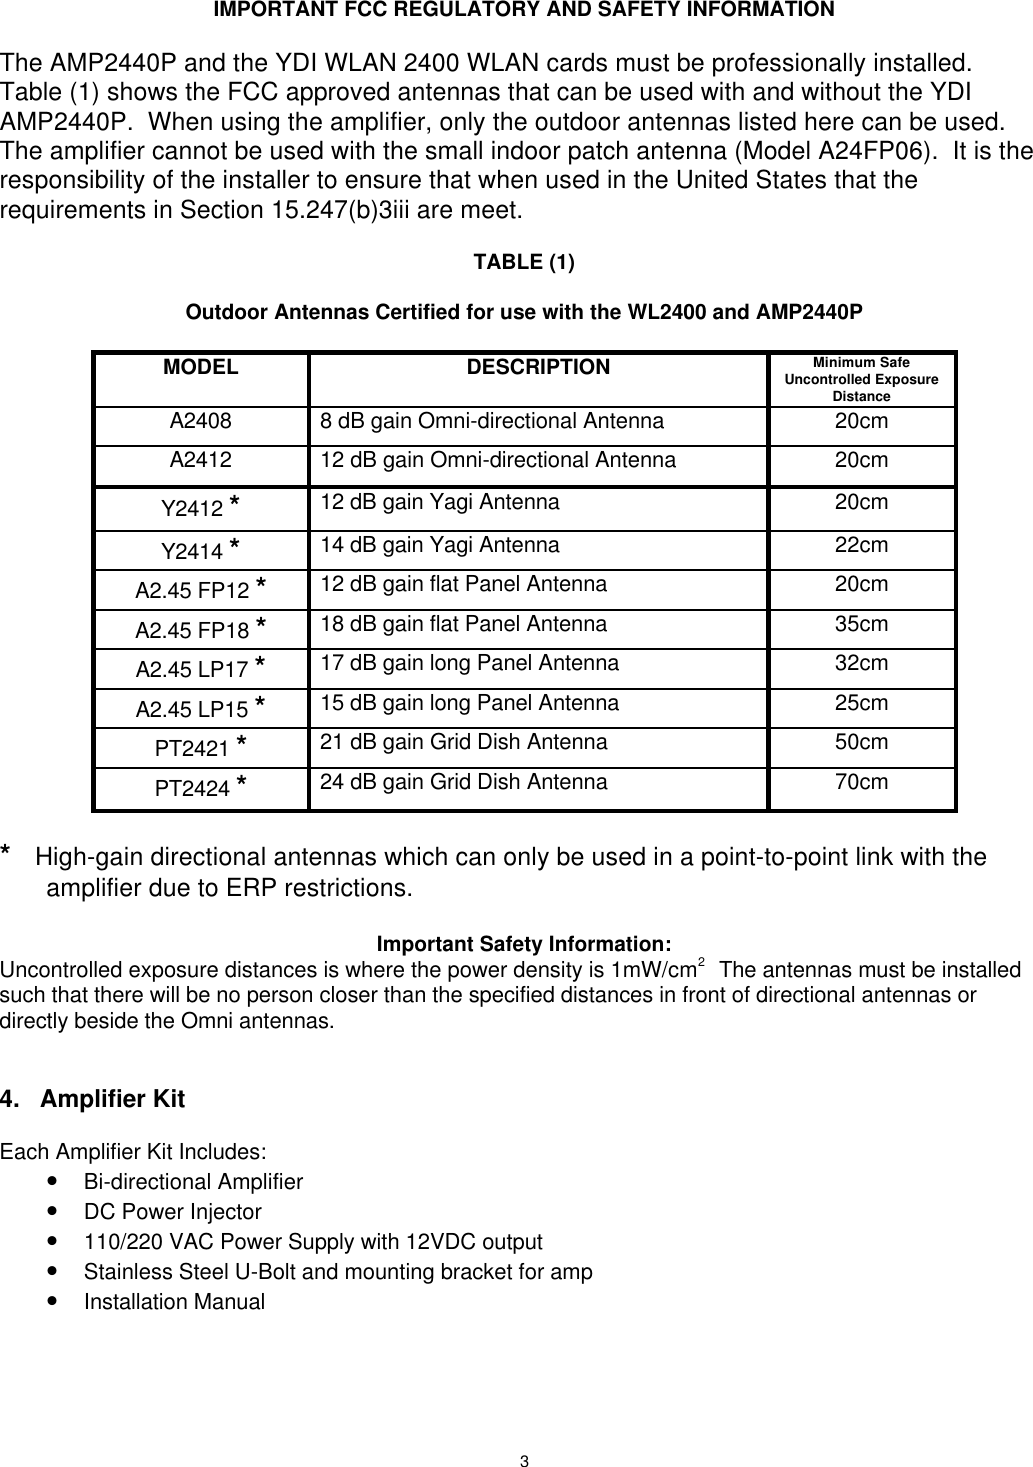 3IMPORTANT FCC REGULATORY AND SAFETY INFORMATIONThe AMP2440P and the YDI WLAN 2400 WLAN cards must be professionally installed.Table (1) shows the FCC approved antennas that can be used with and without the YDIAMP2440P.  When using the amplifier, only the outdoor antennas listed here can be used.The amplifier cannot be used with the small indoor patch antenna (Model A24FP06).  It is theresponsibility of the installer to ensure that when used in the United States that therequirements in Section 15.247(b)3iii are meet.TABLE (1)Outdoor Antennas Certified for use with the WL2400 and AMP2440PMODEL DESCRIPTION Minimum SafeUncontrolled ExposureDistanceA2408 8 dB gain Omni-directional Antenna 20cmA2412 12 dB gain Omni-directional Antenna 20cmY2412 *12 dB gain Yagi Antenna 20cmY2414 *14 dB gain Yagi Antenna 22cmA2.45 FP12 *12 dB gain flat Panel Antenna 20cmA2.45 FP18 *18 dB gain flat Panel Antenna 35cmA2.45 LP17 *17 dB gain long Panel Antenna 32cmA2.45 LP15 *15 dB gain long Panel Antenna 25cmPT2421 *21 dB gain Grid Dish Antenna 50cmPT2424 *24 dB gain Grid Dish Antenna 70cm*   High-gain directional antennas which can only be used in a point-to-point link with theamplifier due to ERP restrictions.Important Safety Information:Uncontrolled exposure distances is where the power density is 1mW/cm2    The antennas must be installedsuch that there will be no person closer than the specified distances in front of directional antennas ordirectly beside the Omni antennas.4. Amplifier KitEach Amplifier Kit Includes:• Bi-directional Amplifier• DC Power Injector• 110/220 VAC Power Supply with 12VDC output• Stainless Steel U-Bolt and mounting bracket for amp• Installation Manual